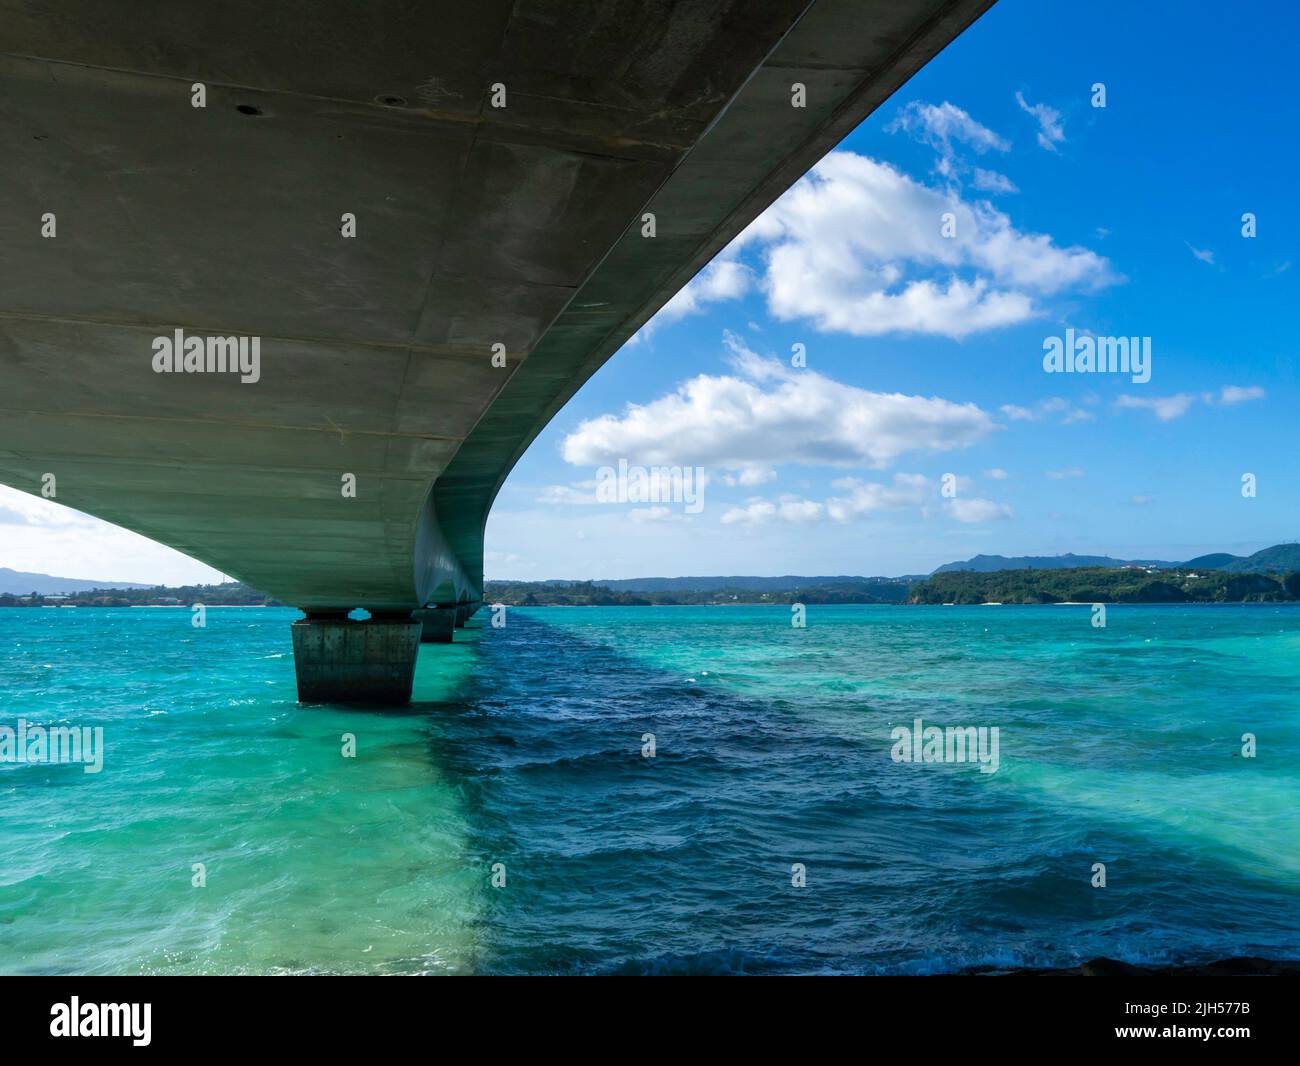 Kouri Bridge in Okinawa against blue sky and white clouds. Green and blue ocean on the bottom. Stock Photo